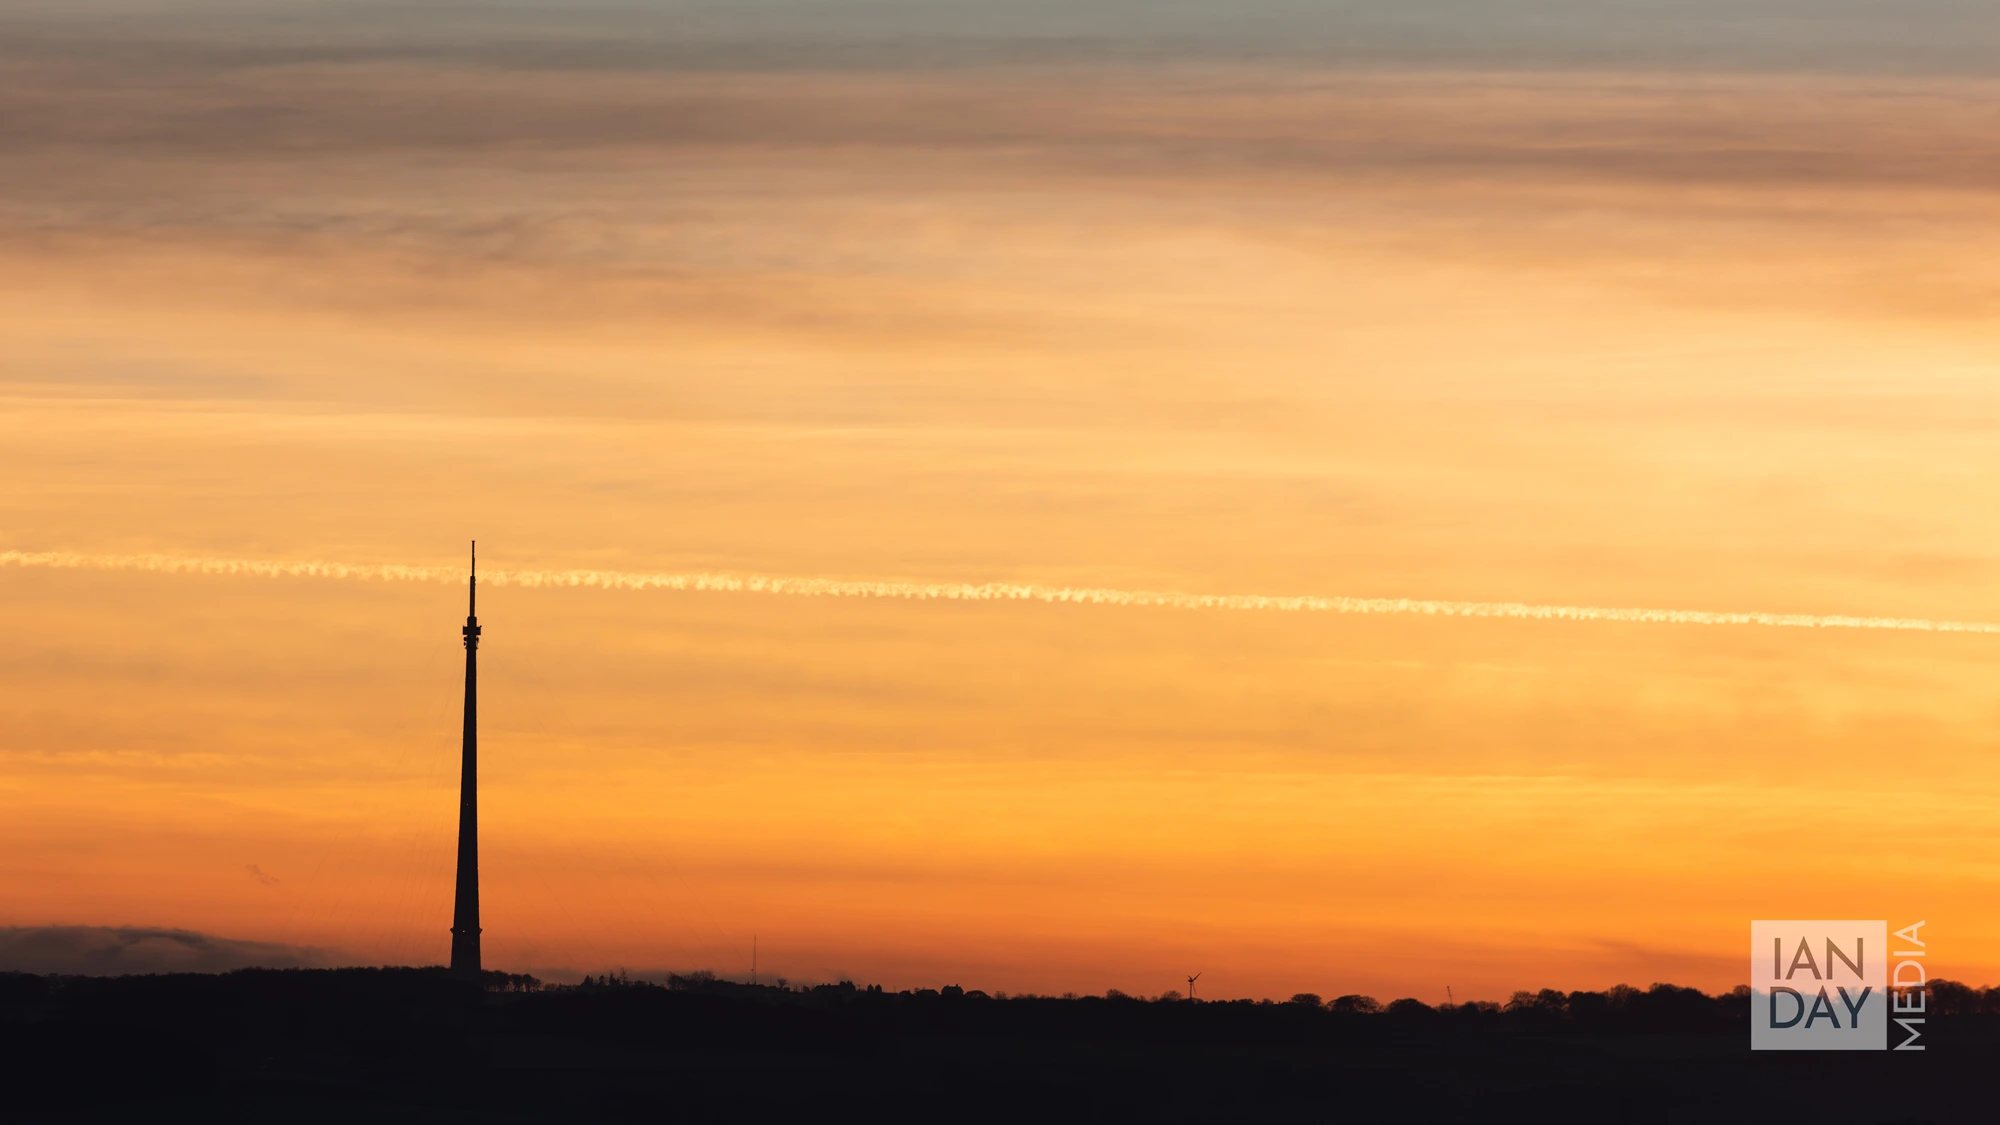 The sun sets behind the Emley Moor television tower in West Yorkshire. The tower is the tallest freestanding structure in the United Kingdom.